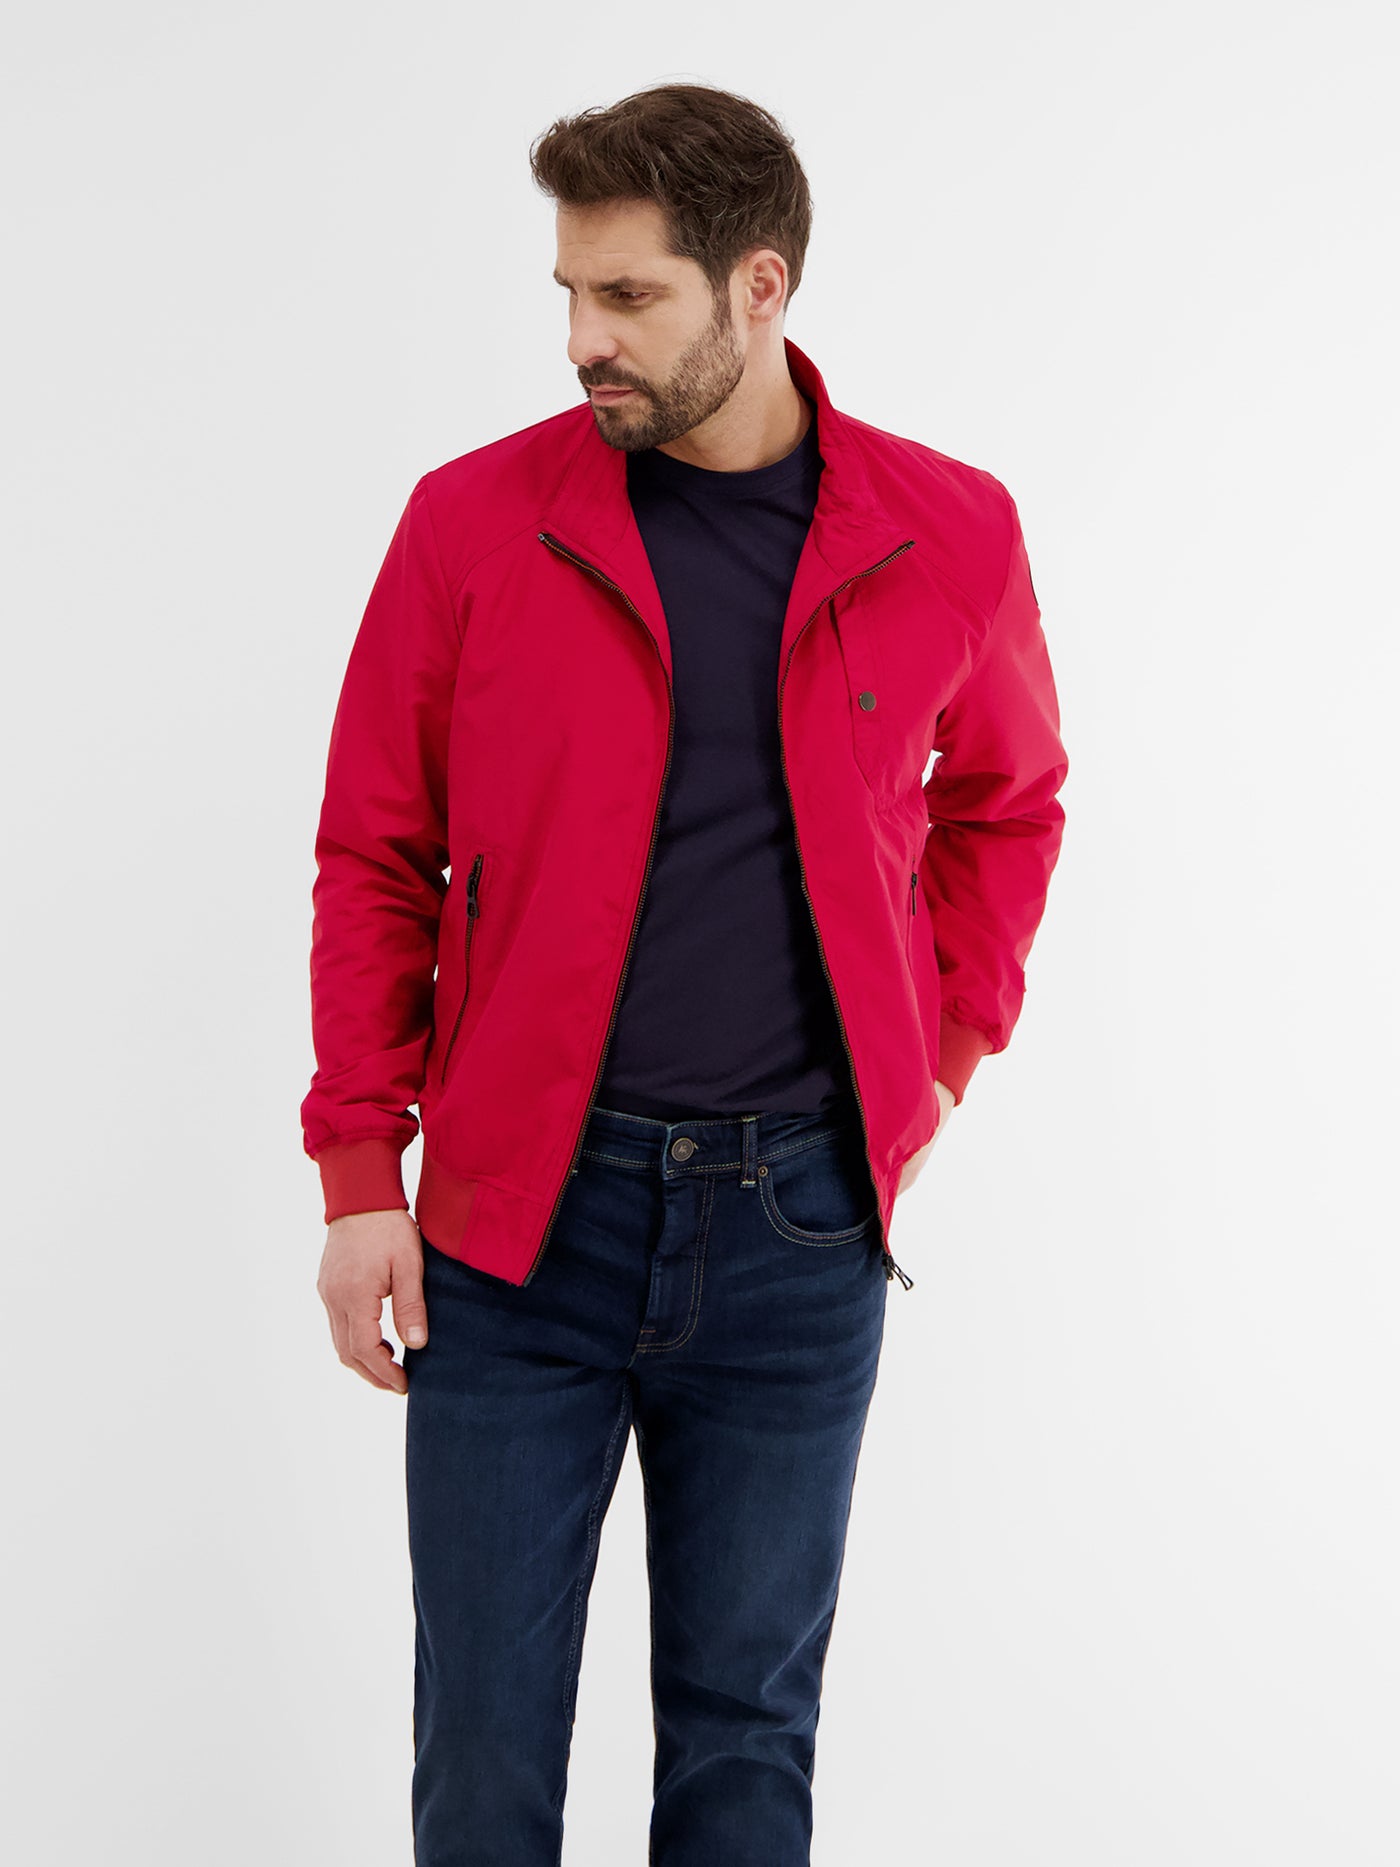 Light, summery blouson with stand-up collar